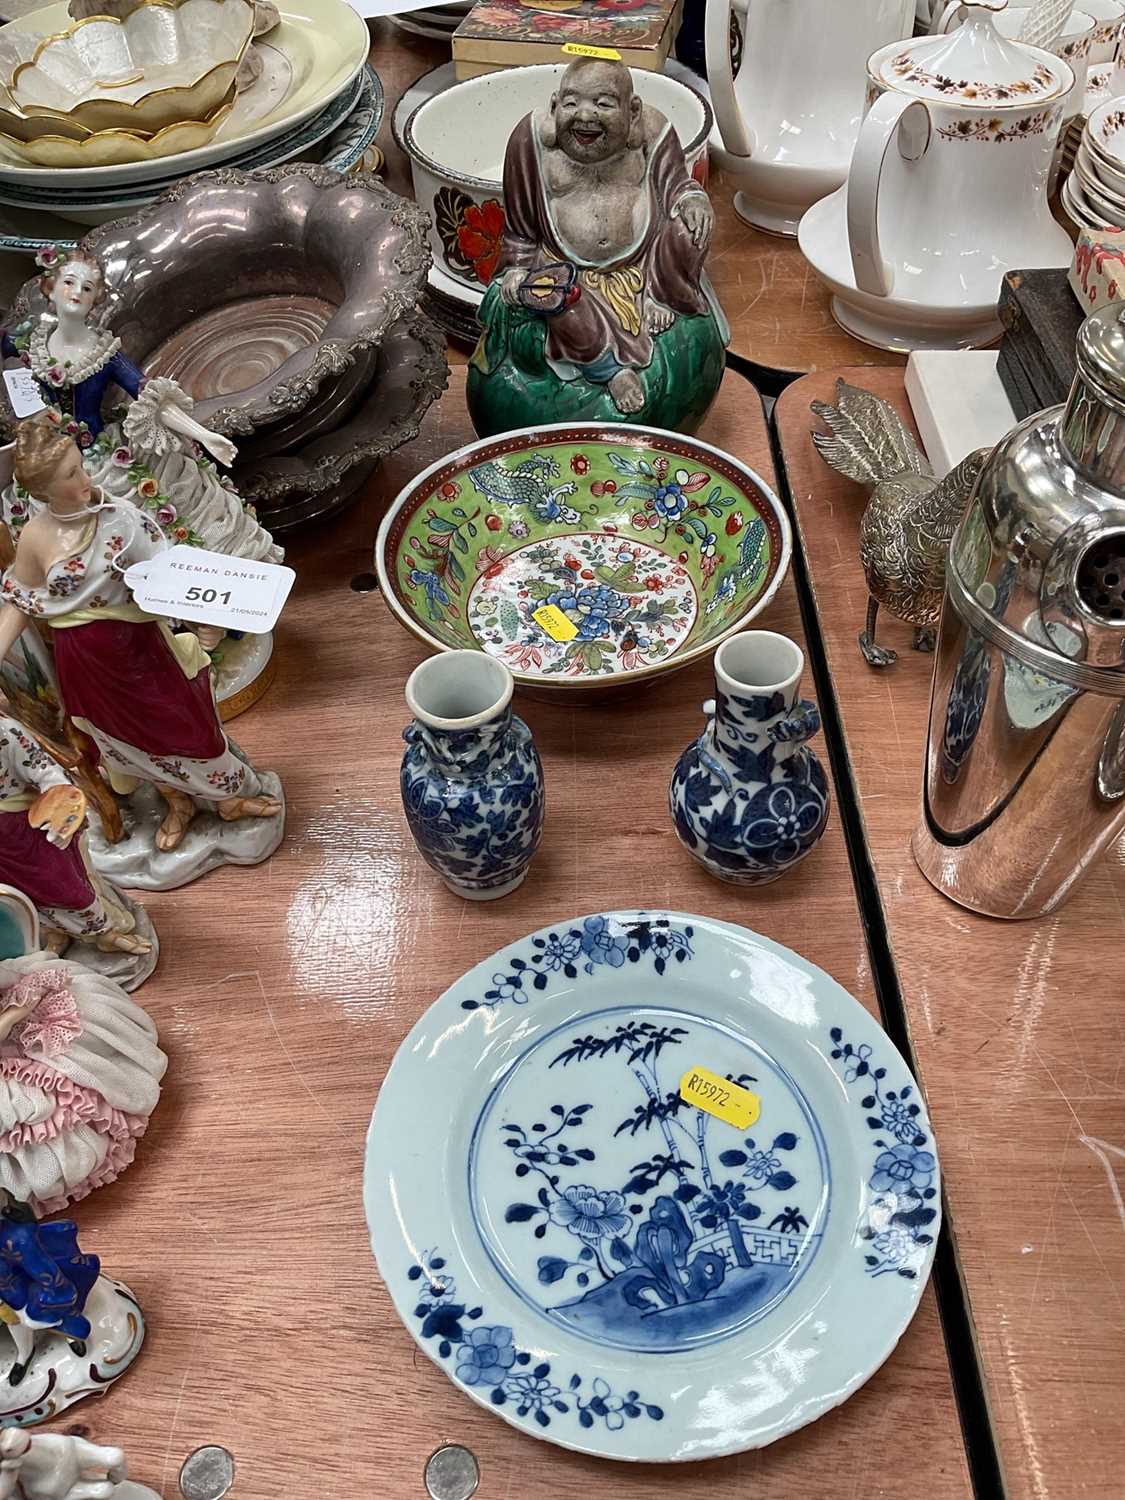 Clobbered Chinese porcelain bowl, blue and white porcelain plate, vases and seated Buddha figure